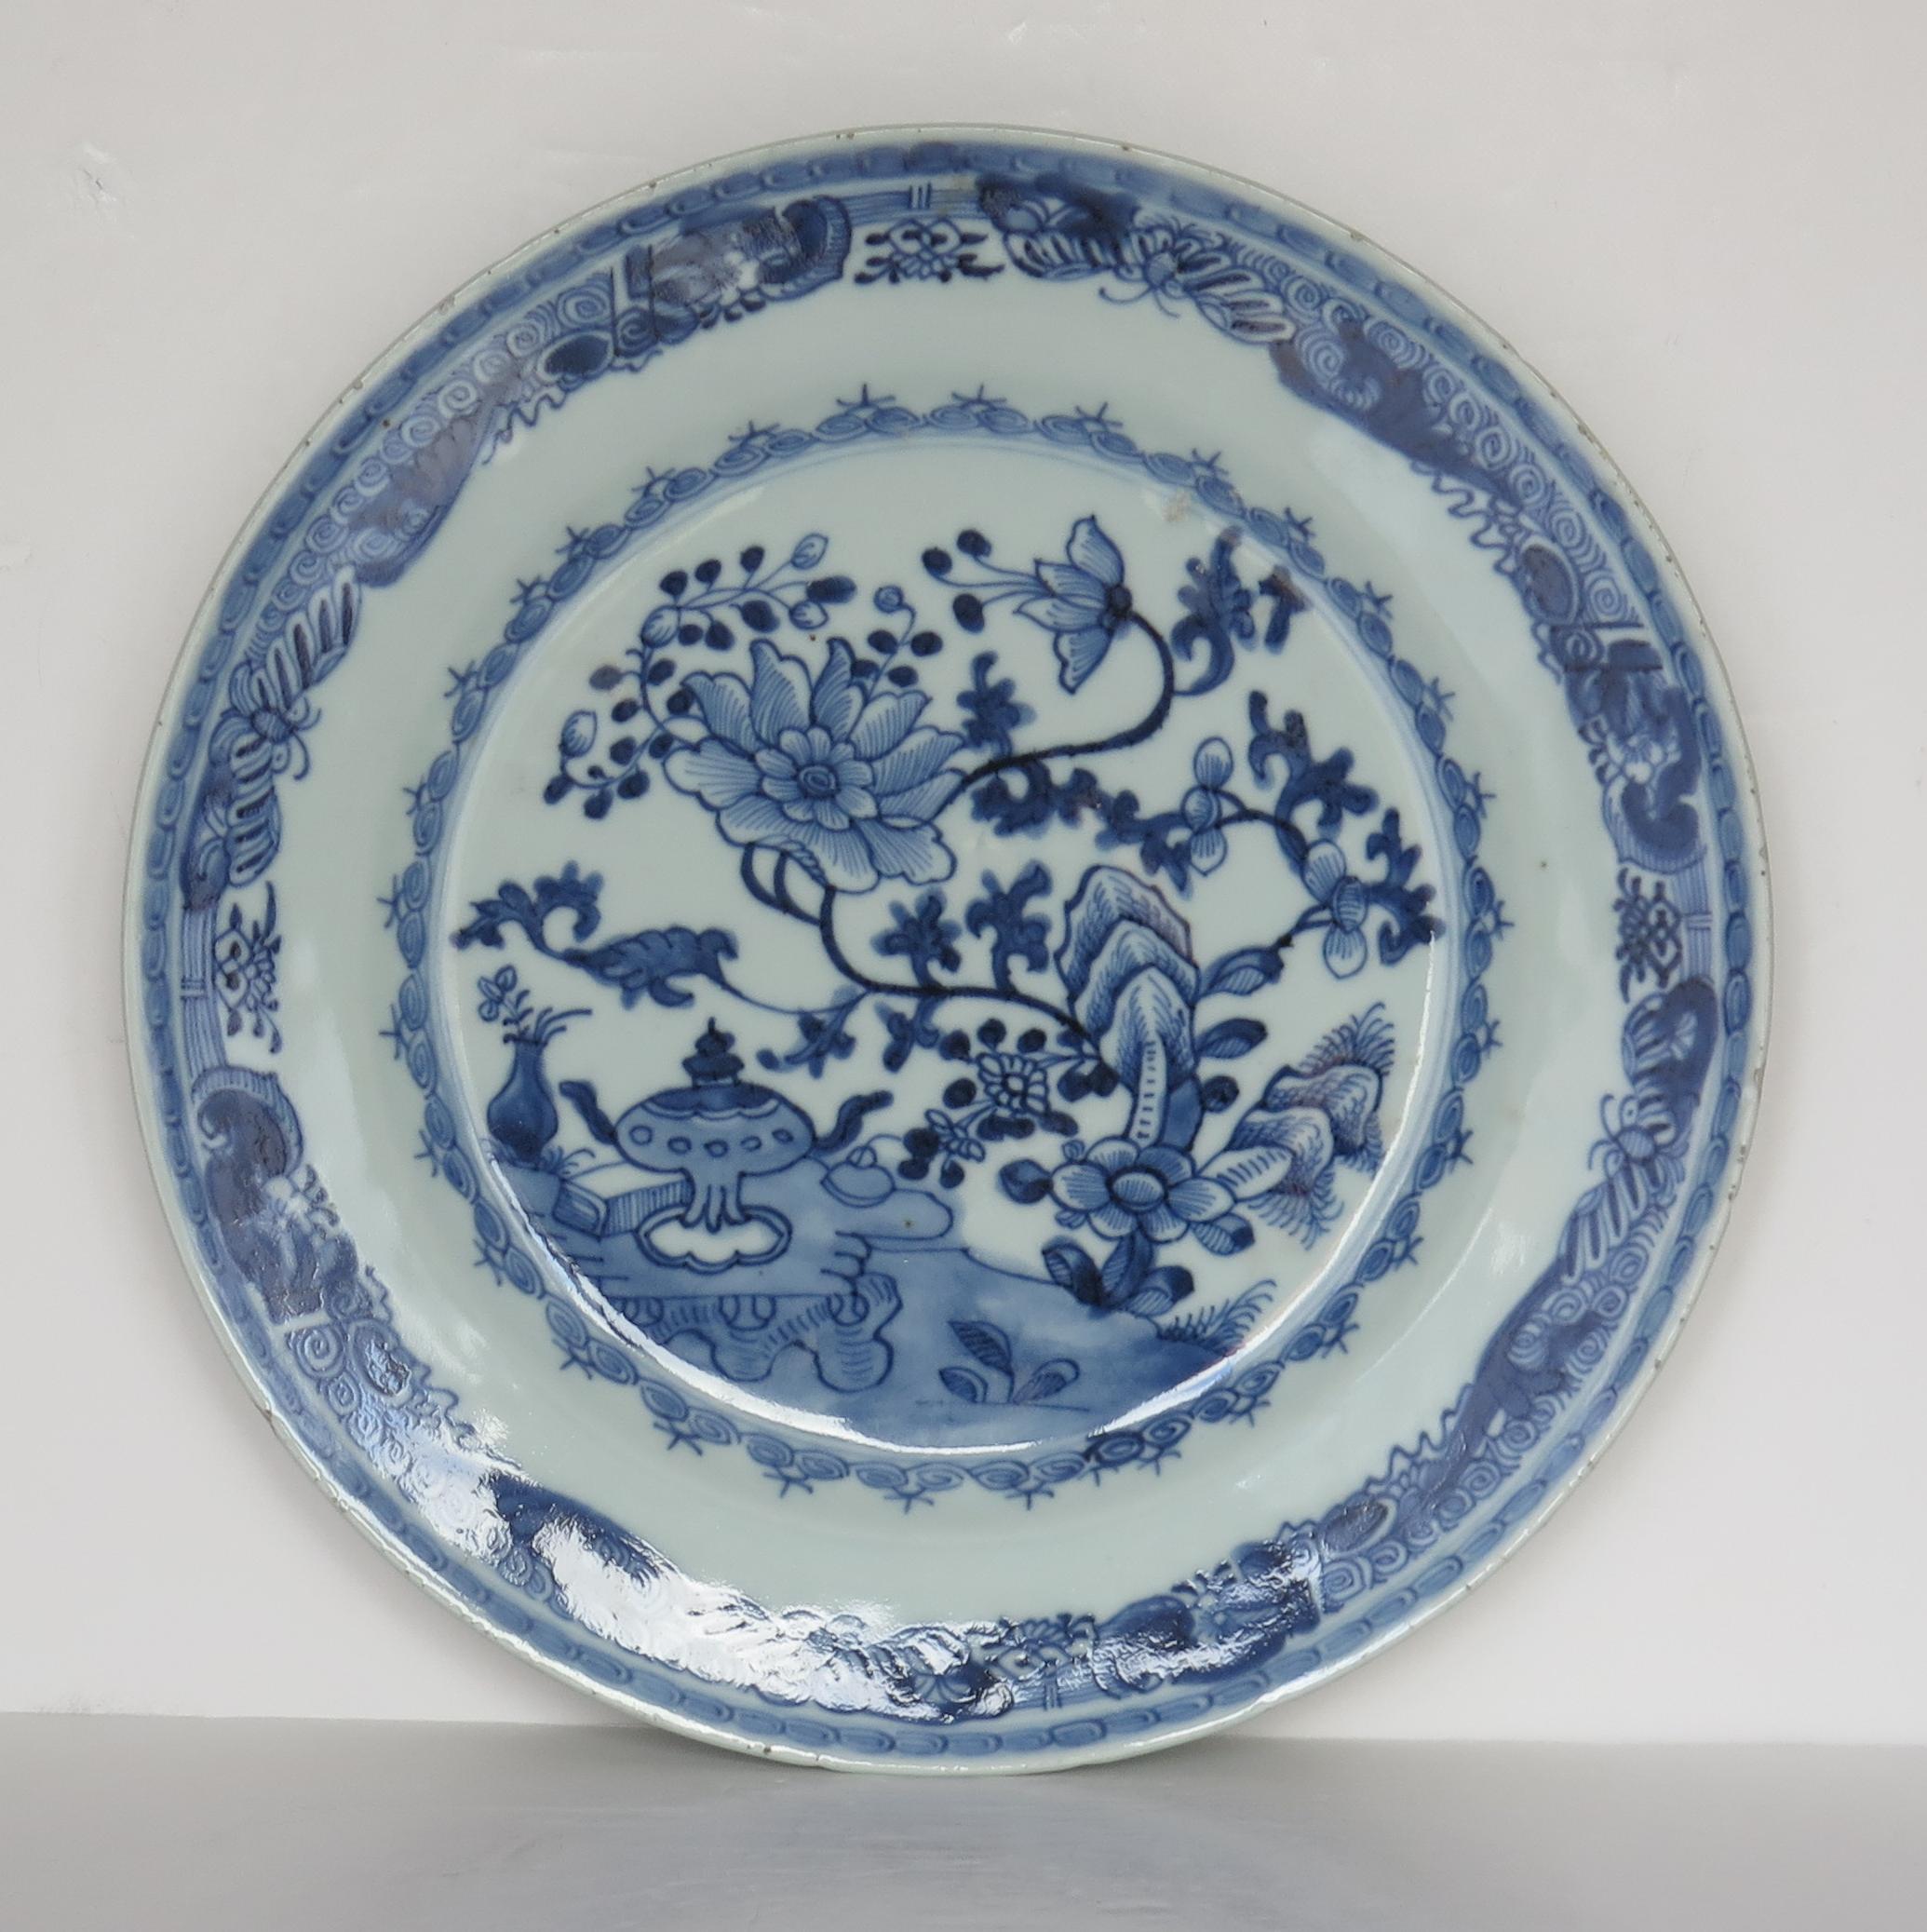 This is a very good Chinese porcelain large plate, made for the export (Canton) market, during the middle of the 18th century, Qing-Qianlong period.

The plate is well hand decorated with much detail in varying shades of cobalt blue, with a glaze